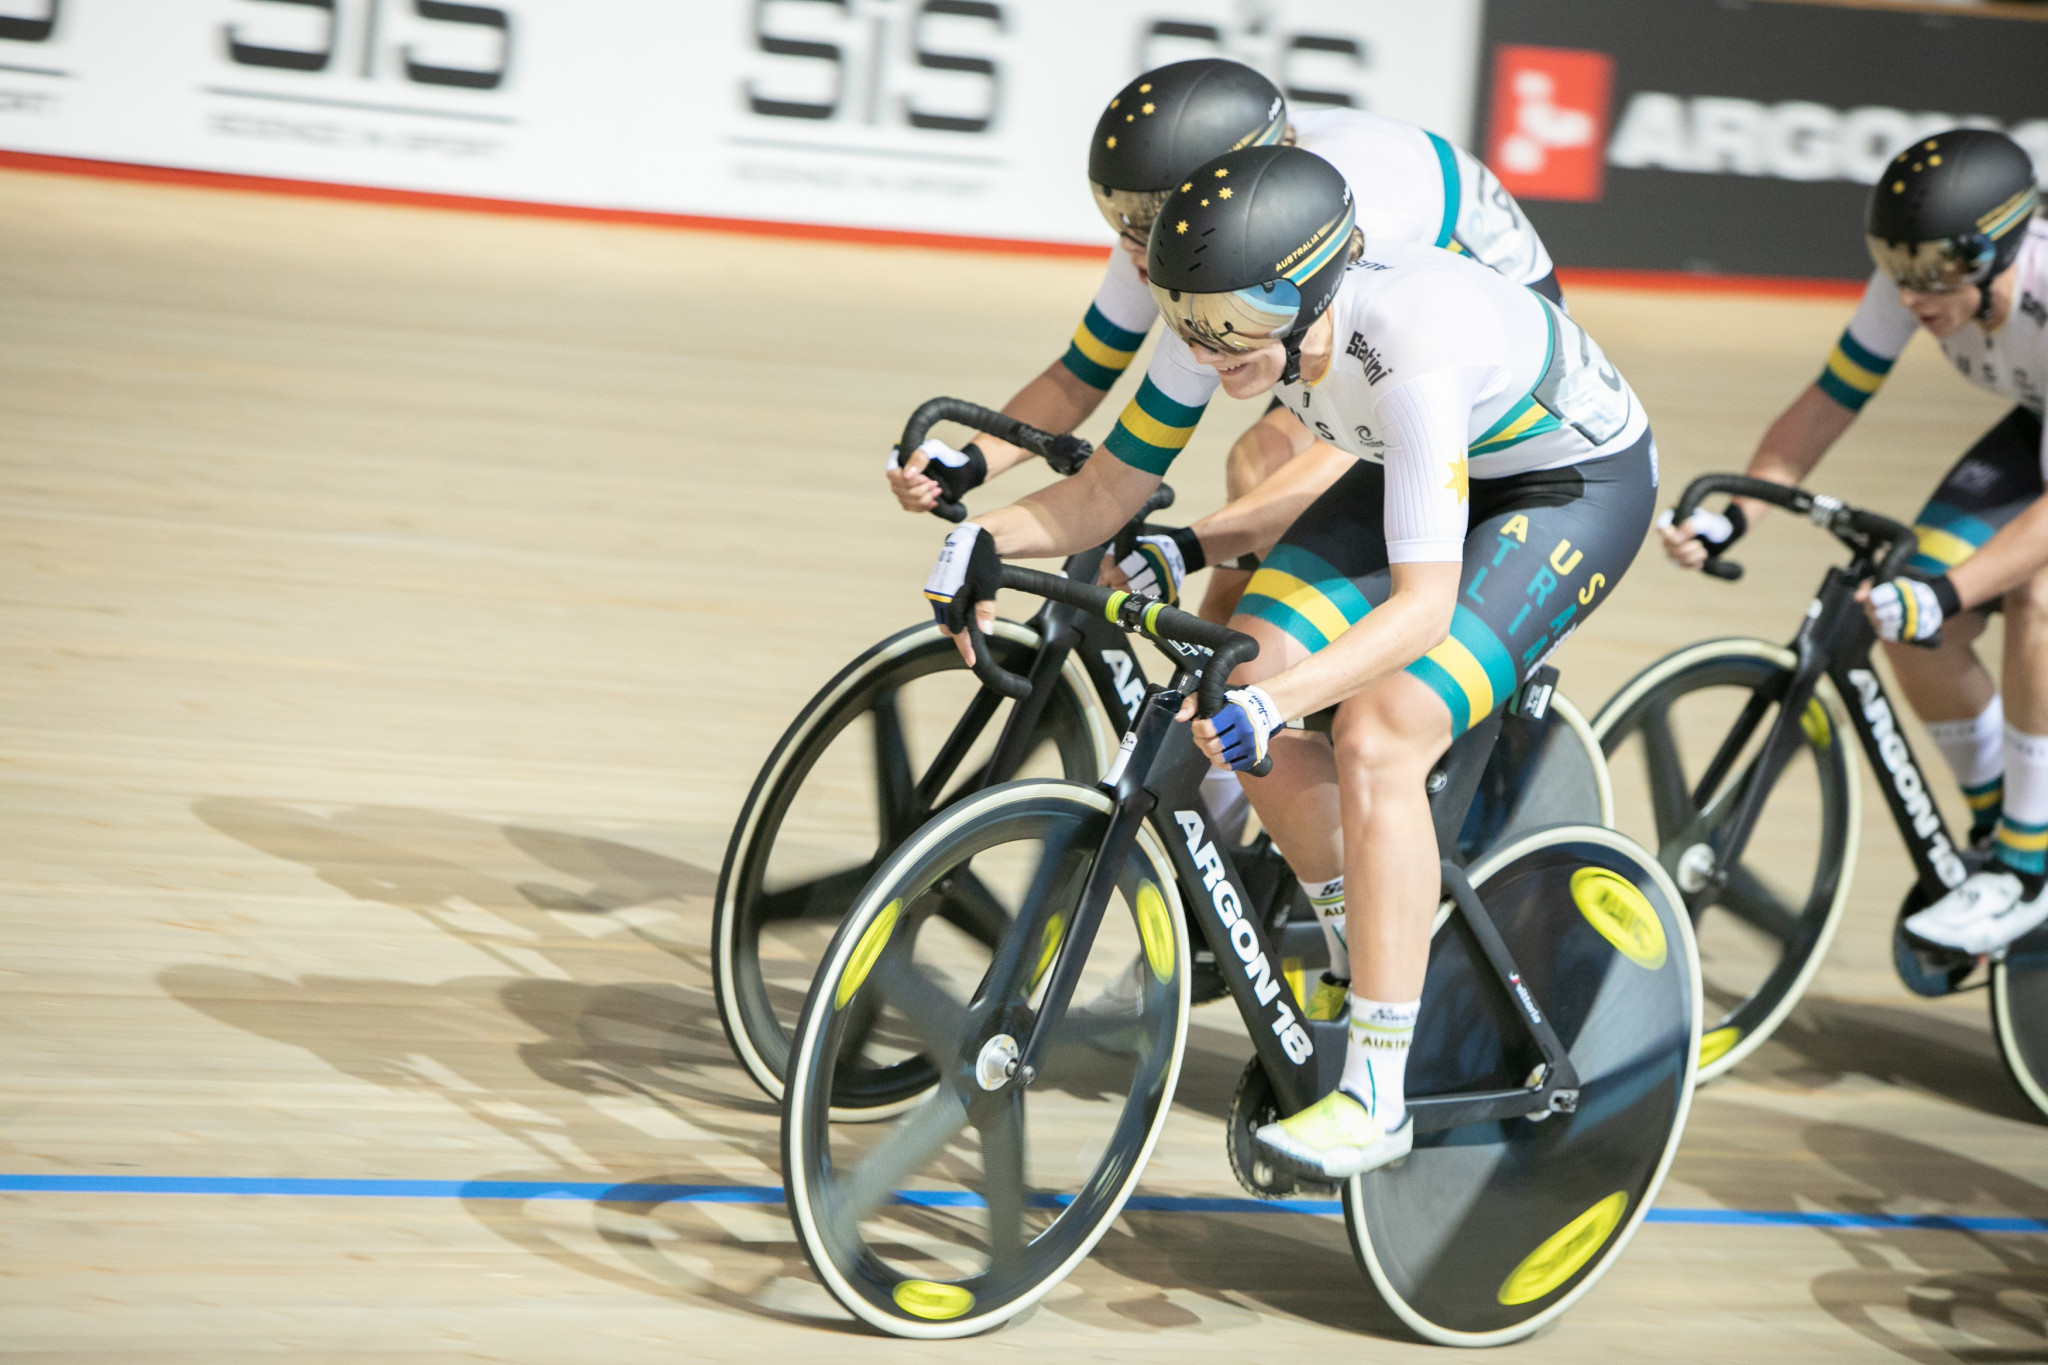 Australia's Ashlee Ankudinoff claimed her third gold of the Championships in the women's scratch race ©Kevin Anderson/Chameleon Photography